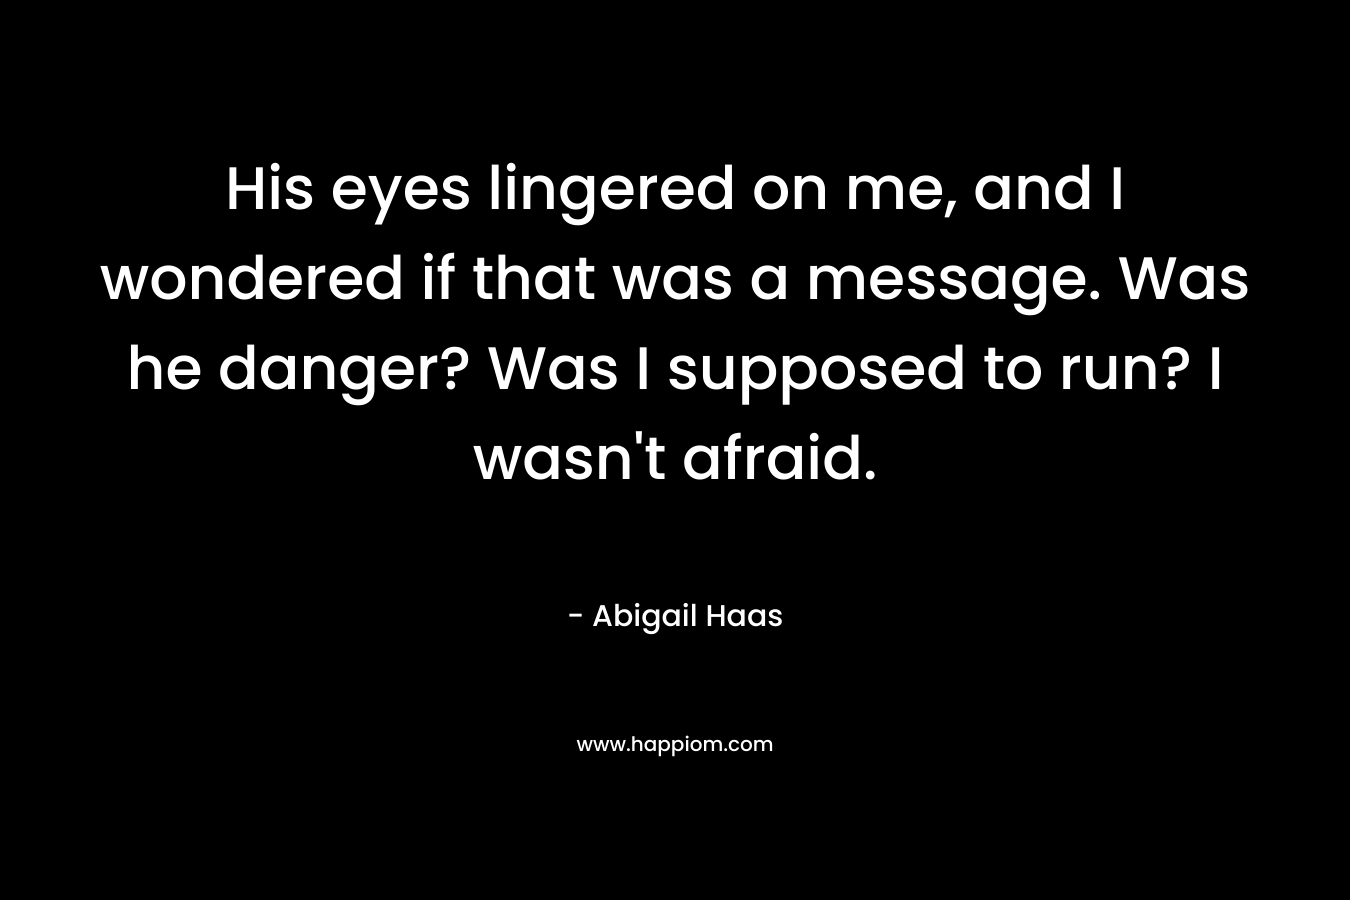 His eyes lingered on me, and I wondered if that was a message. Was he danger? Was I supposed to run? I wasn’t afraid. – Abigail Haas